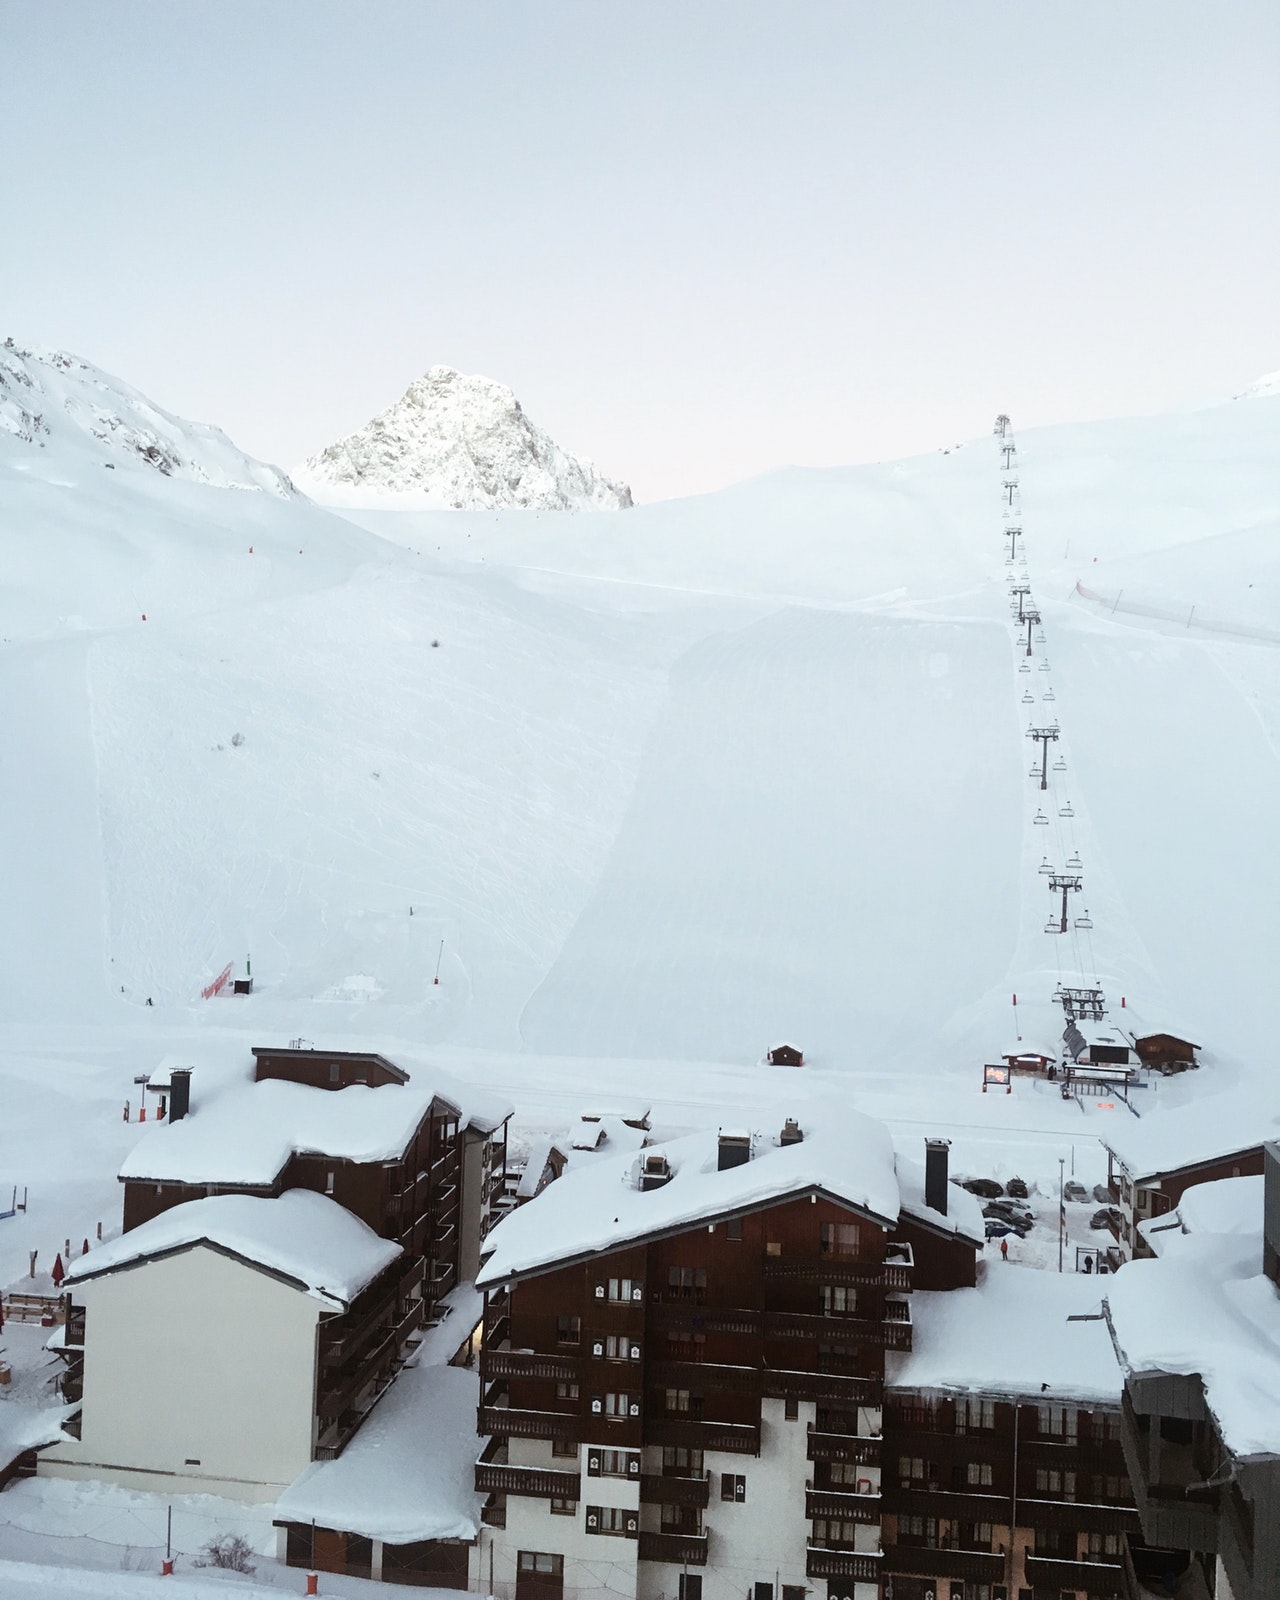 TOP TRAVEL TIPS FOR A SKIING TRIP IN TIGNES